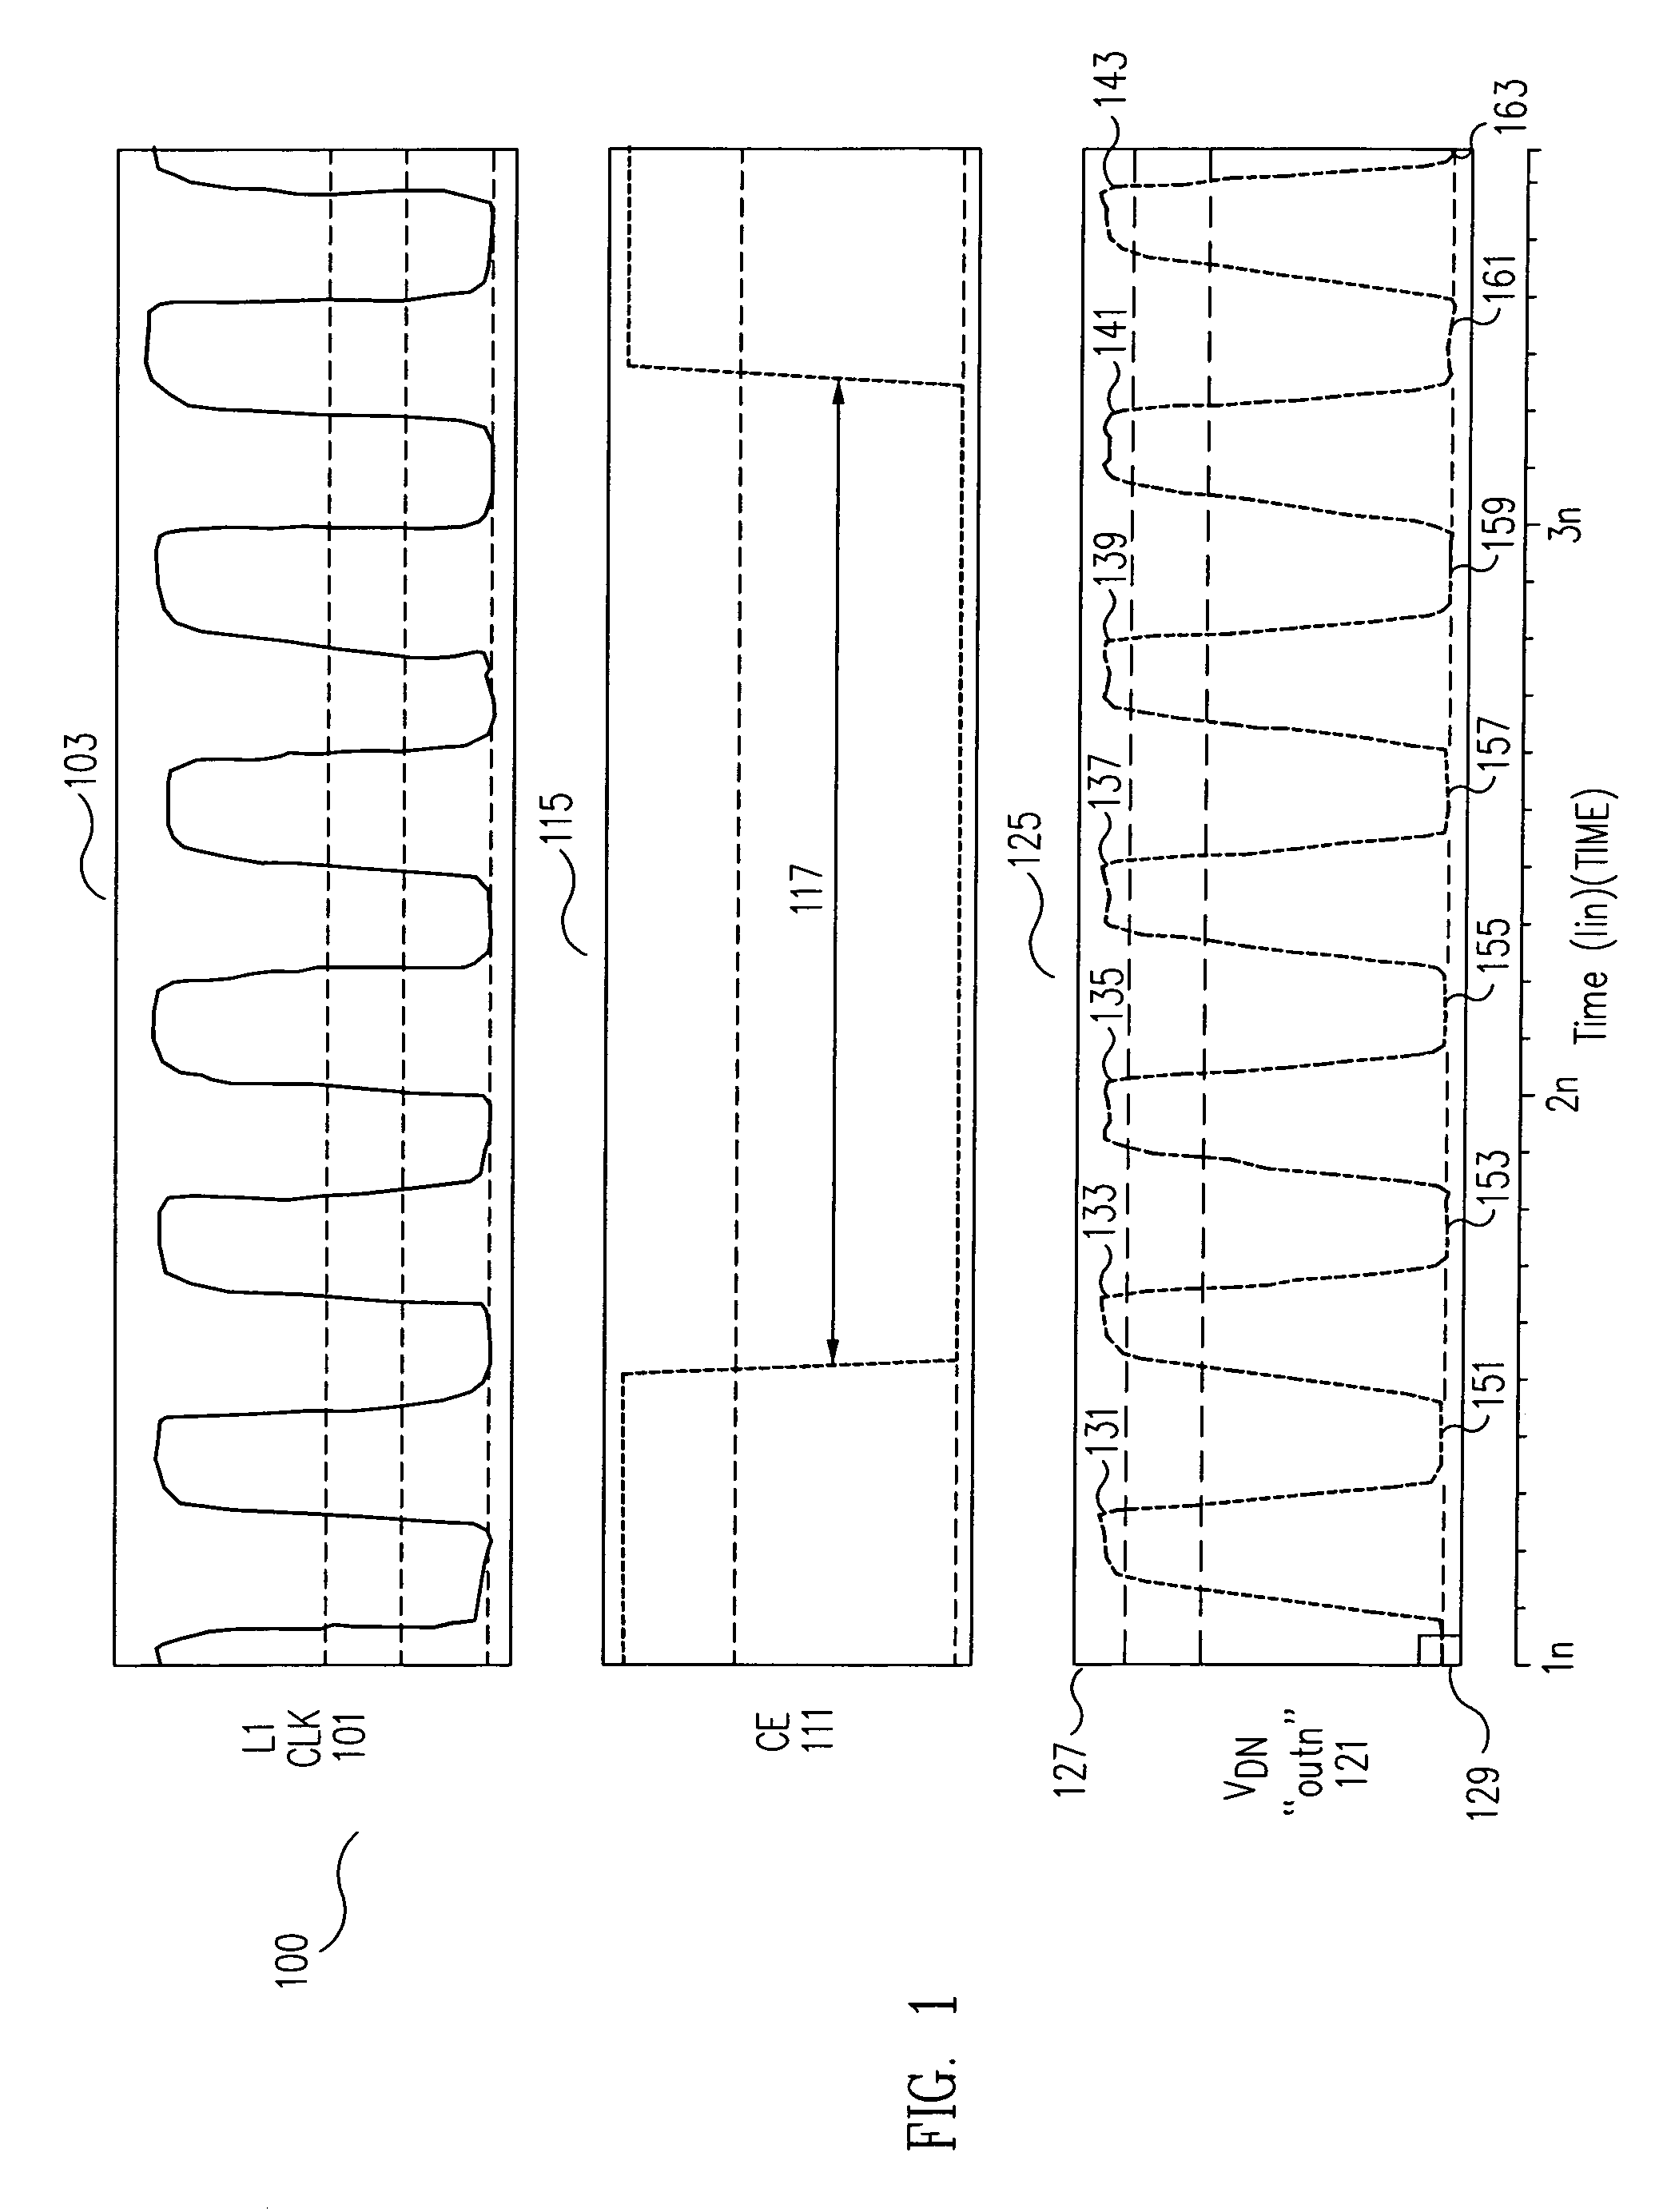 Conditional precharge design in staticized dynamic flip-flop with clock enable